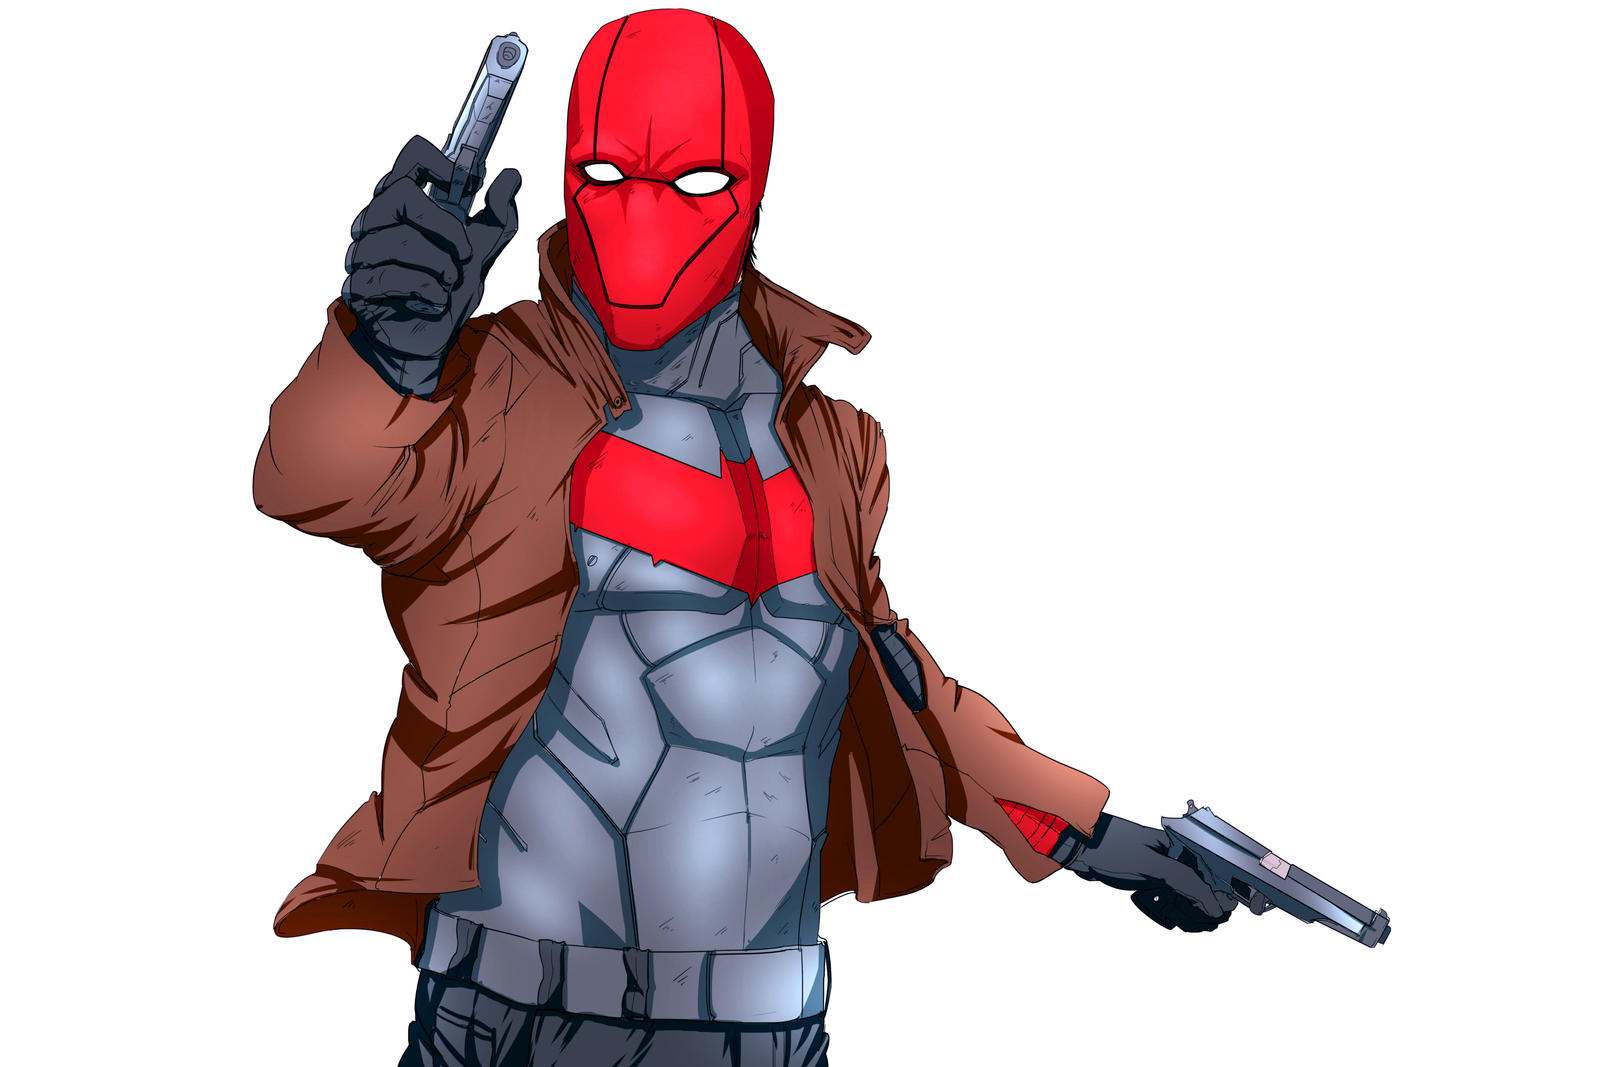 Red Hood No Background by Animixter on DeviantArt